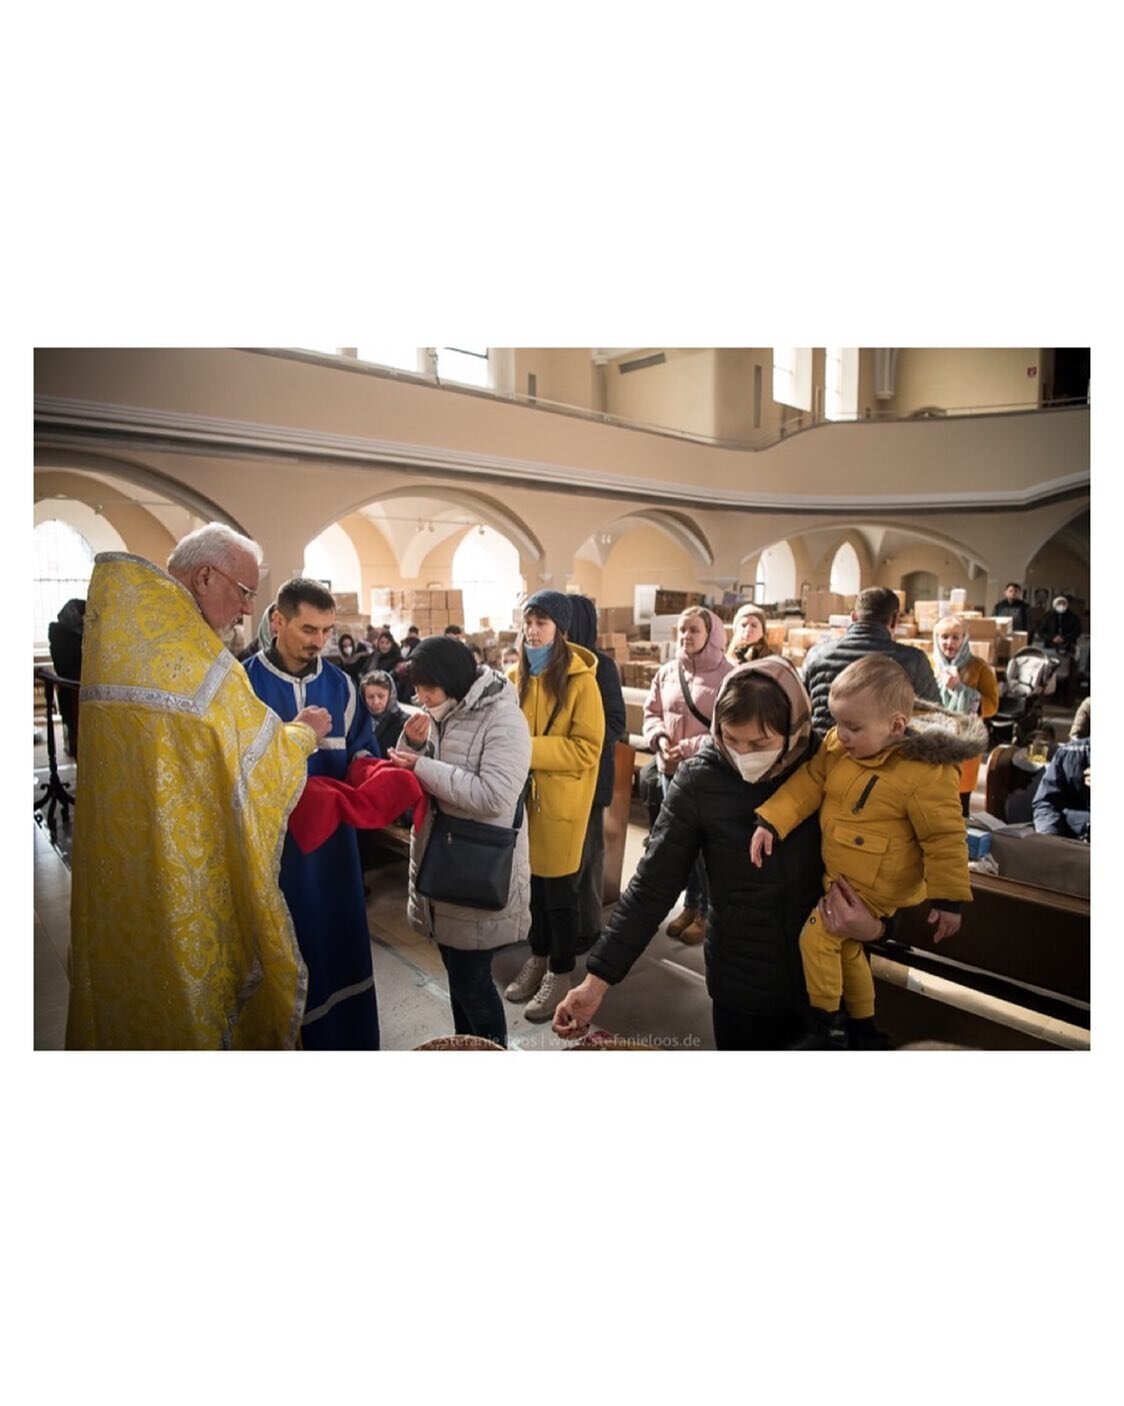 Praying for Peace
Members of the Ukrainian Orthodox community, who have found shelter for their church service in an evangelical church, and refugees from Ukraine celebrate a church service in Berlin
.
for @apnews
.
Story by Kirsten Grieshaber

https